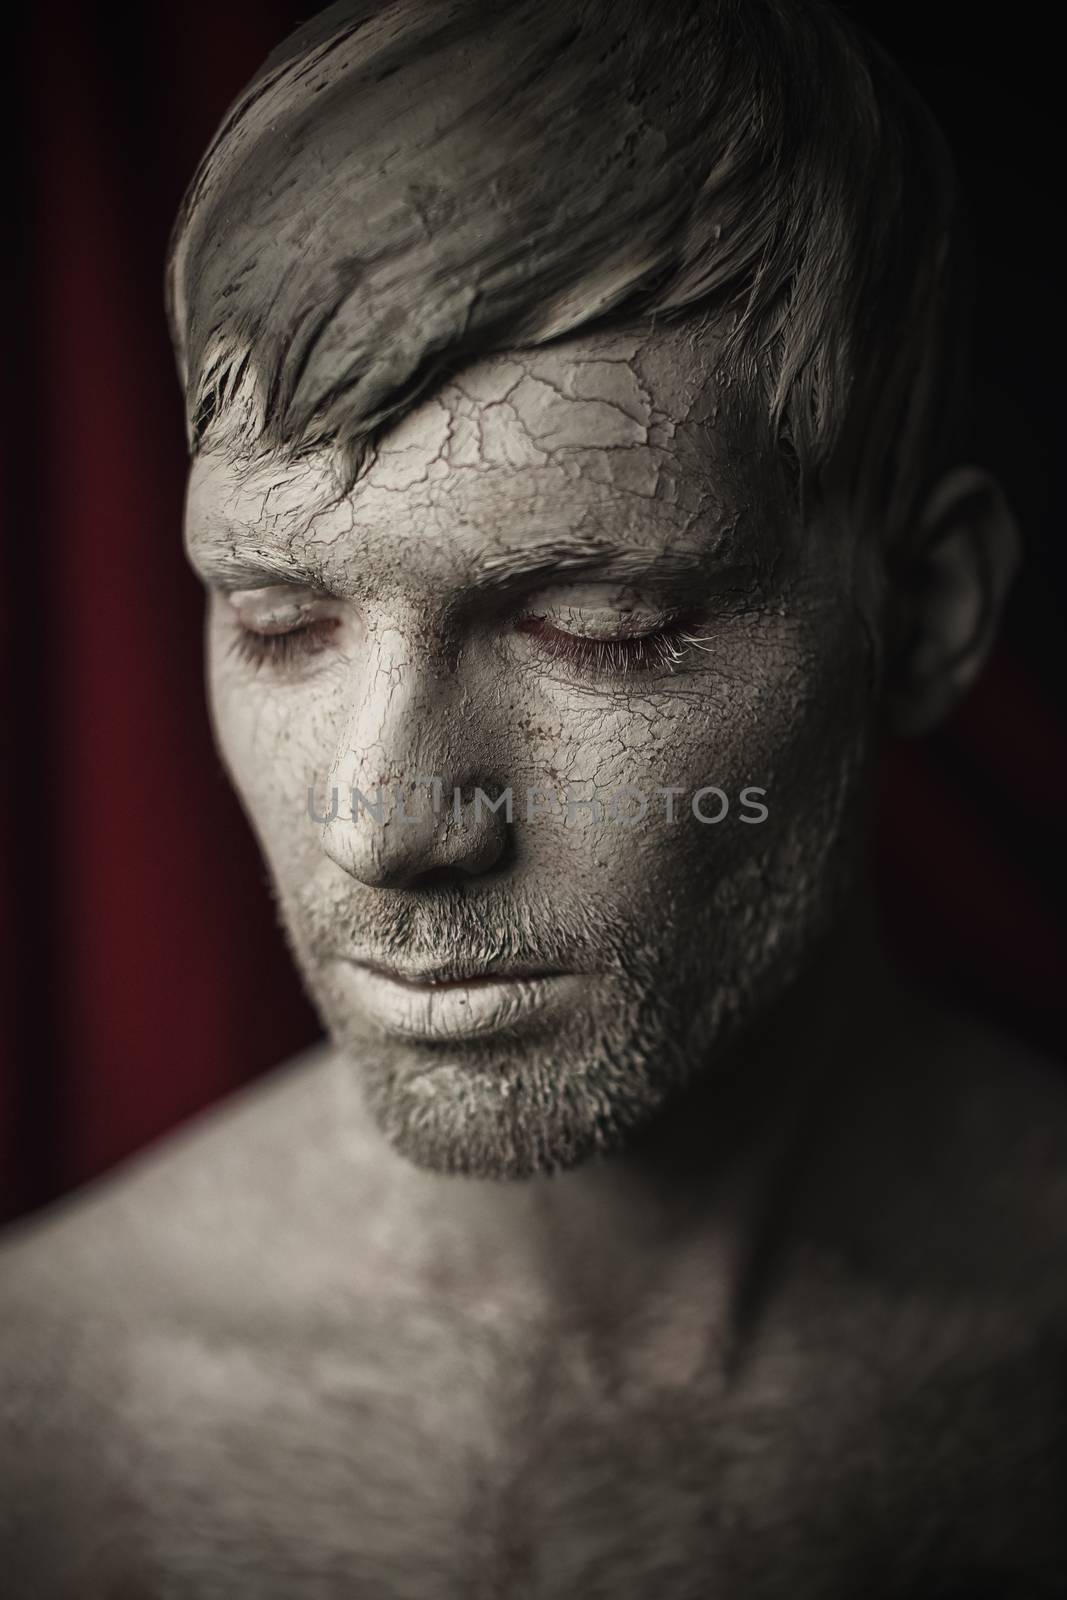 Man Face with Skin Covered in Mud by Multipedia